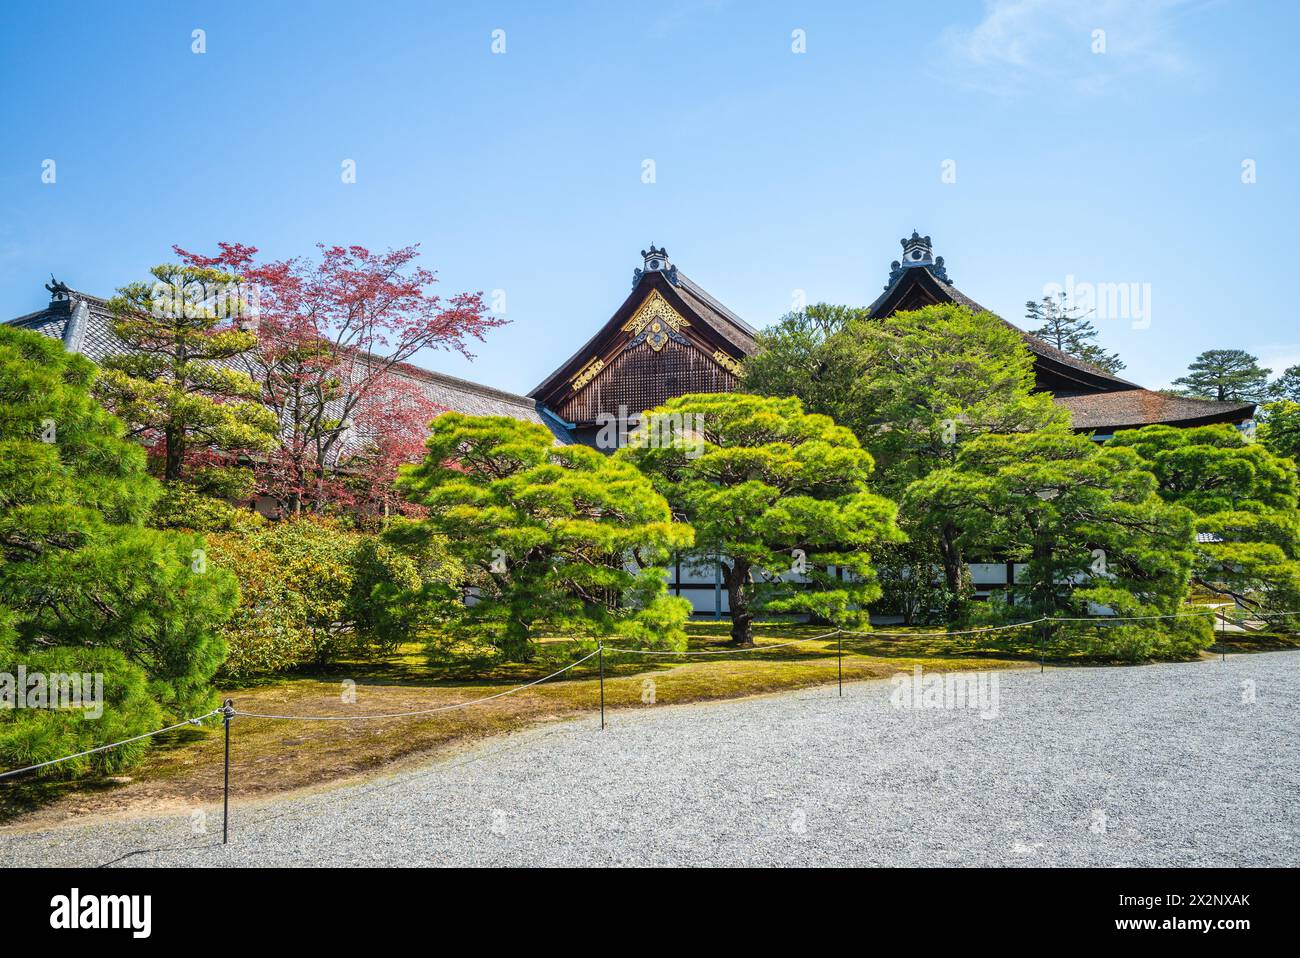 Kyoto Imperial Palace, the former palace of the Emperor of Japan, in Kyoto Stock Photo